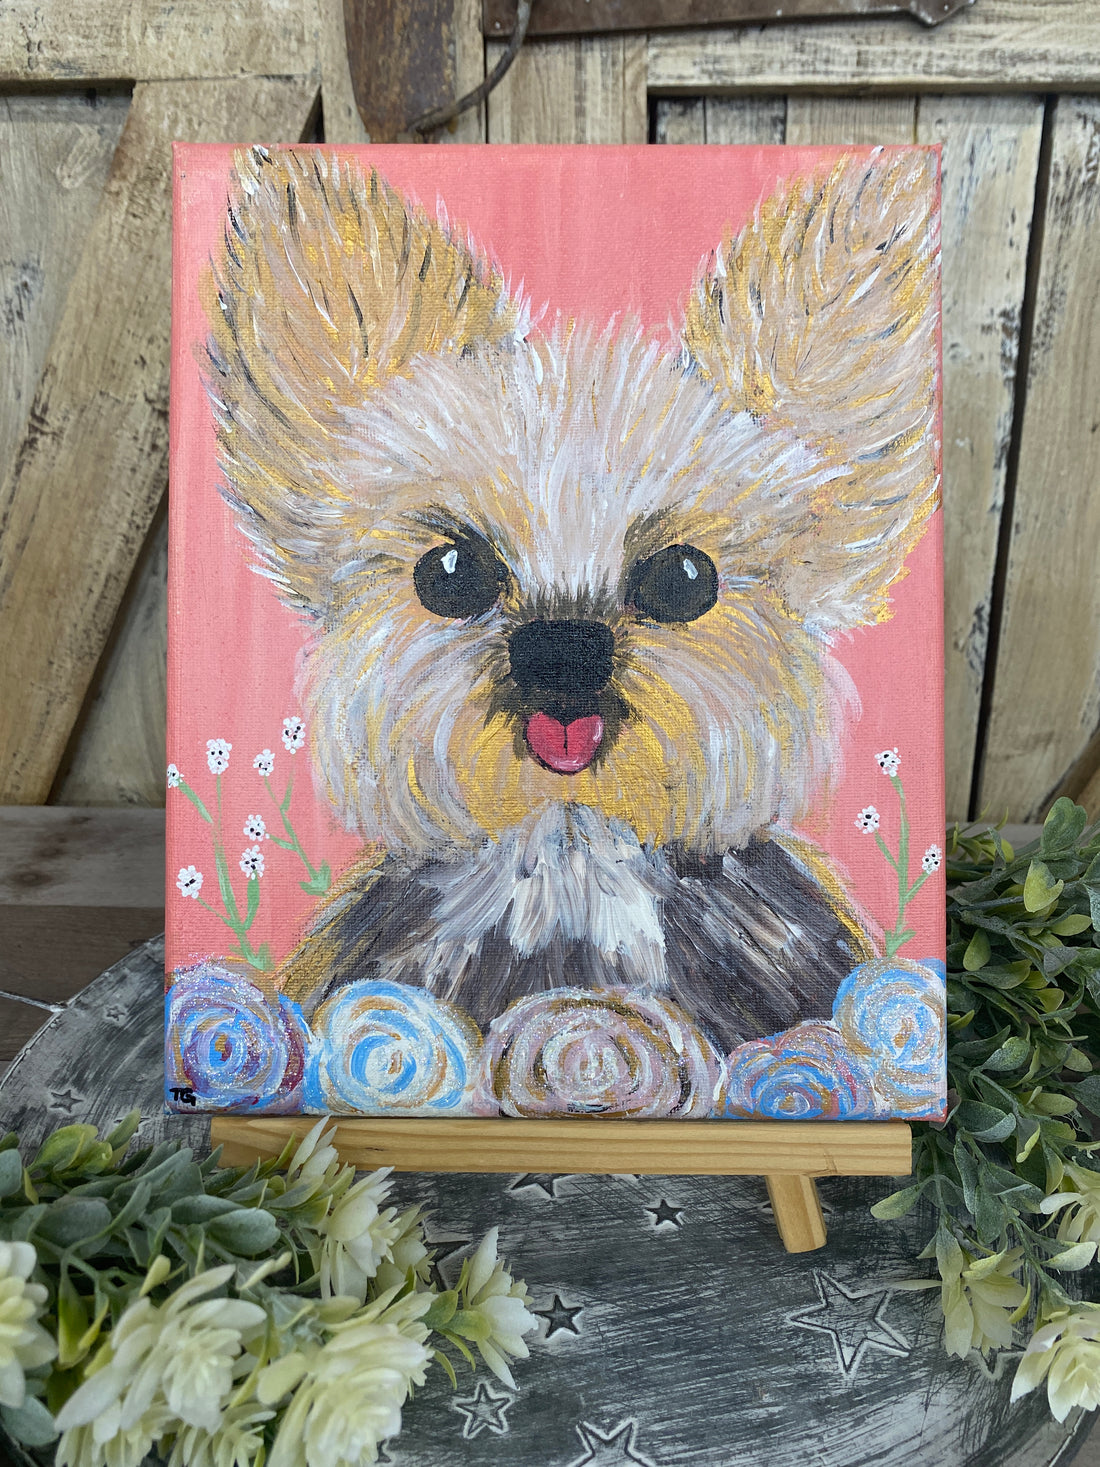 Yorkie Sticking Out Tongue Painting